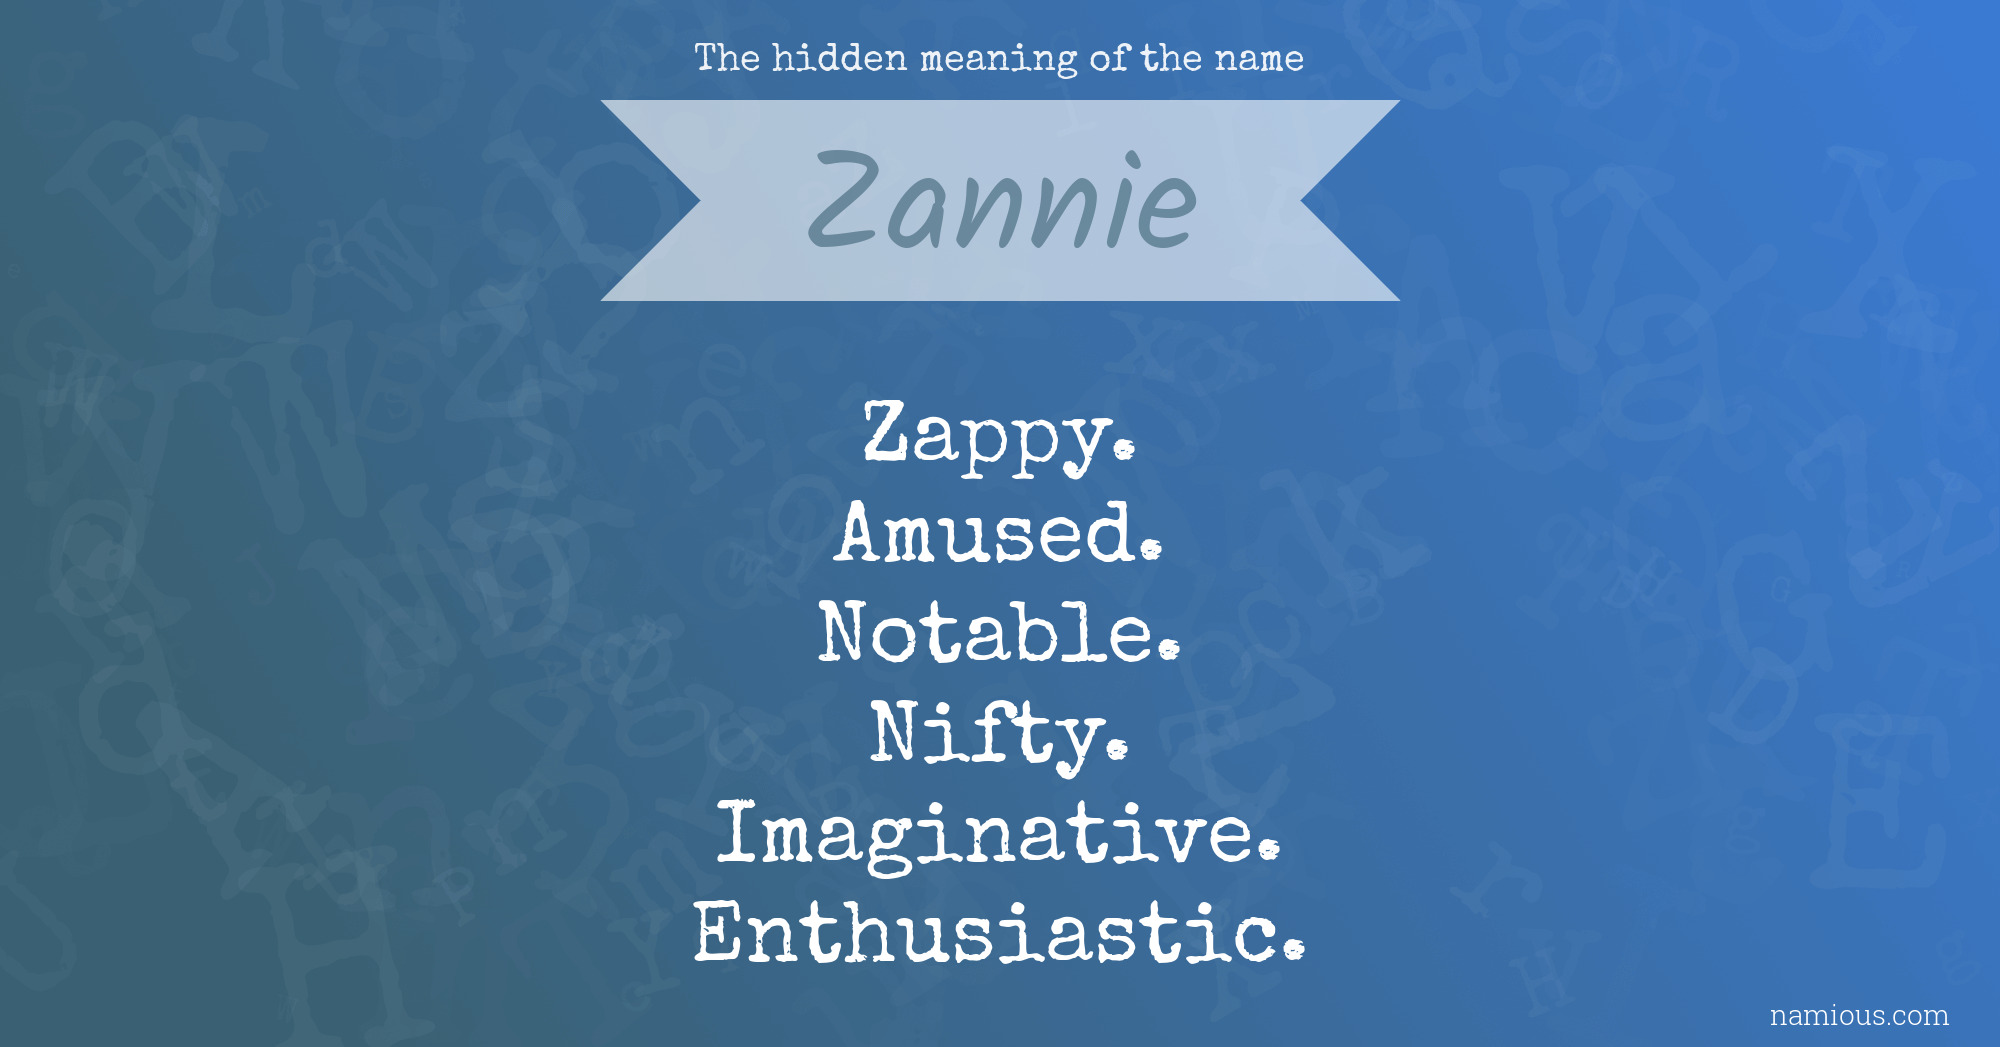 The hidden meaning of the name Zannie